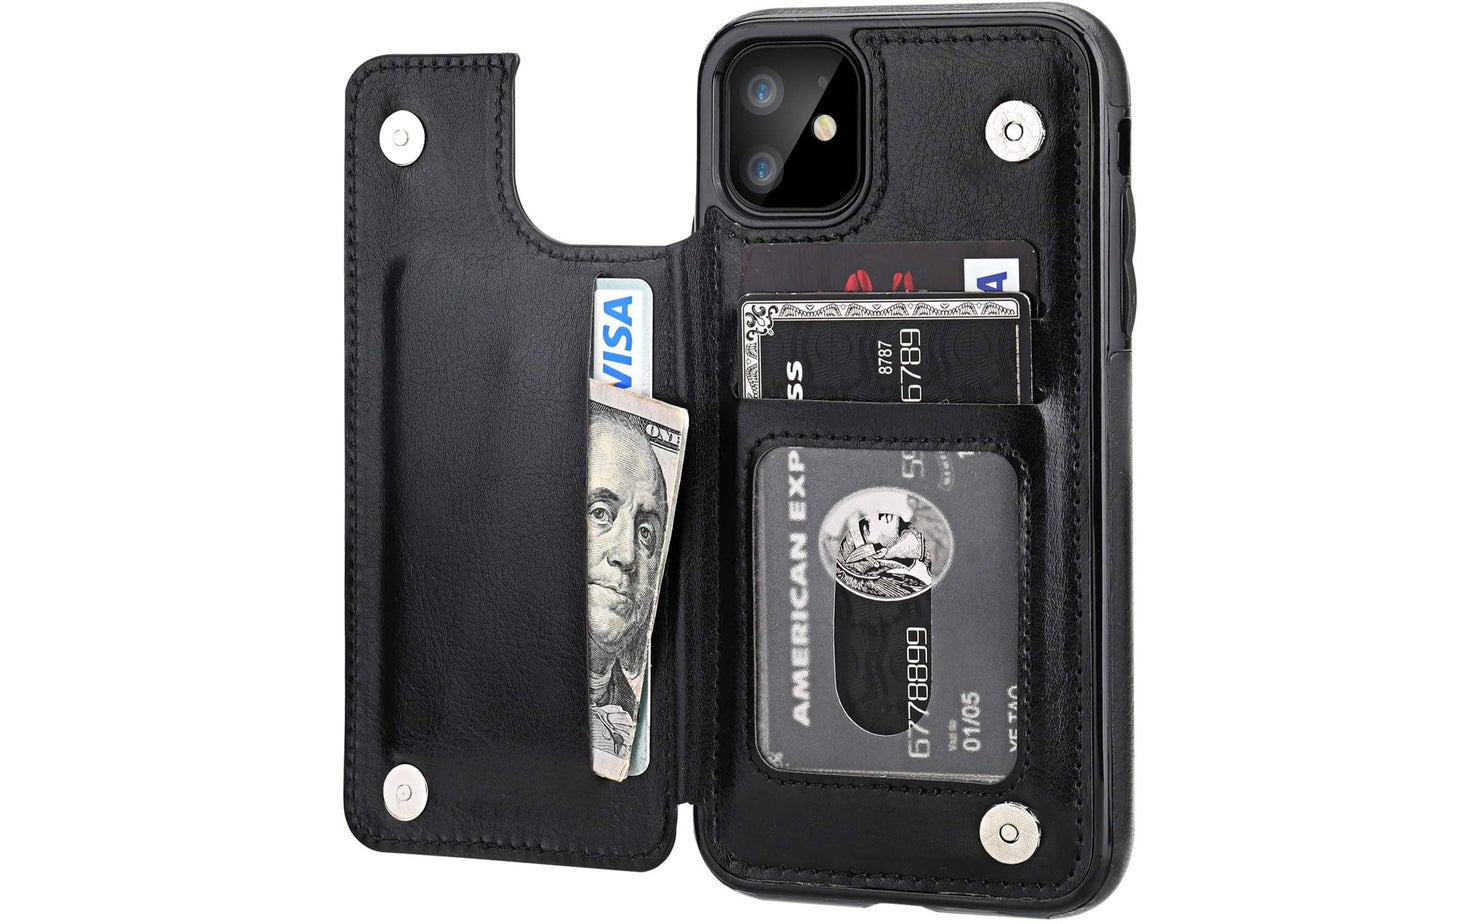 OT Onetop iPhone Wallet Case with Card Holder